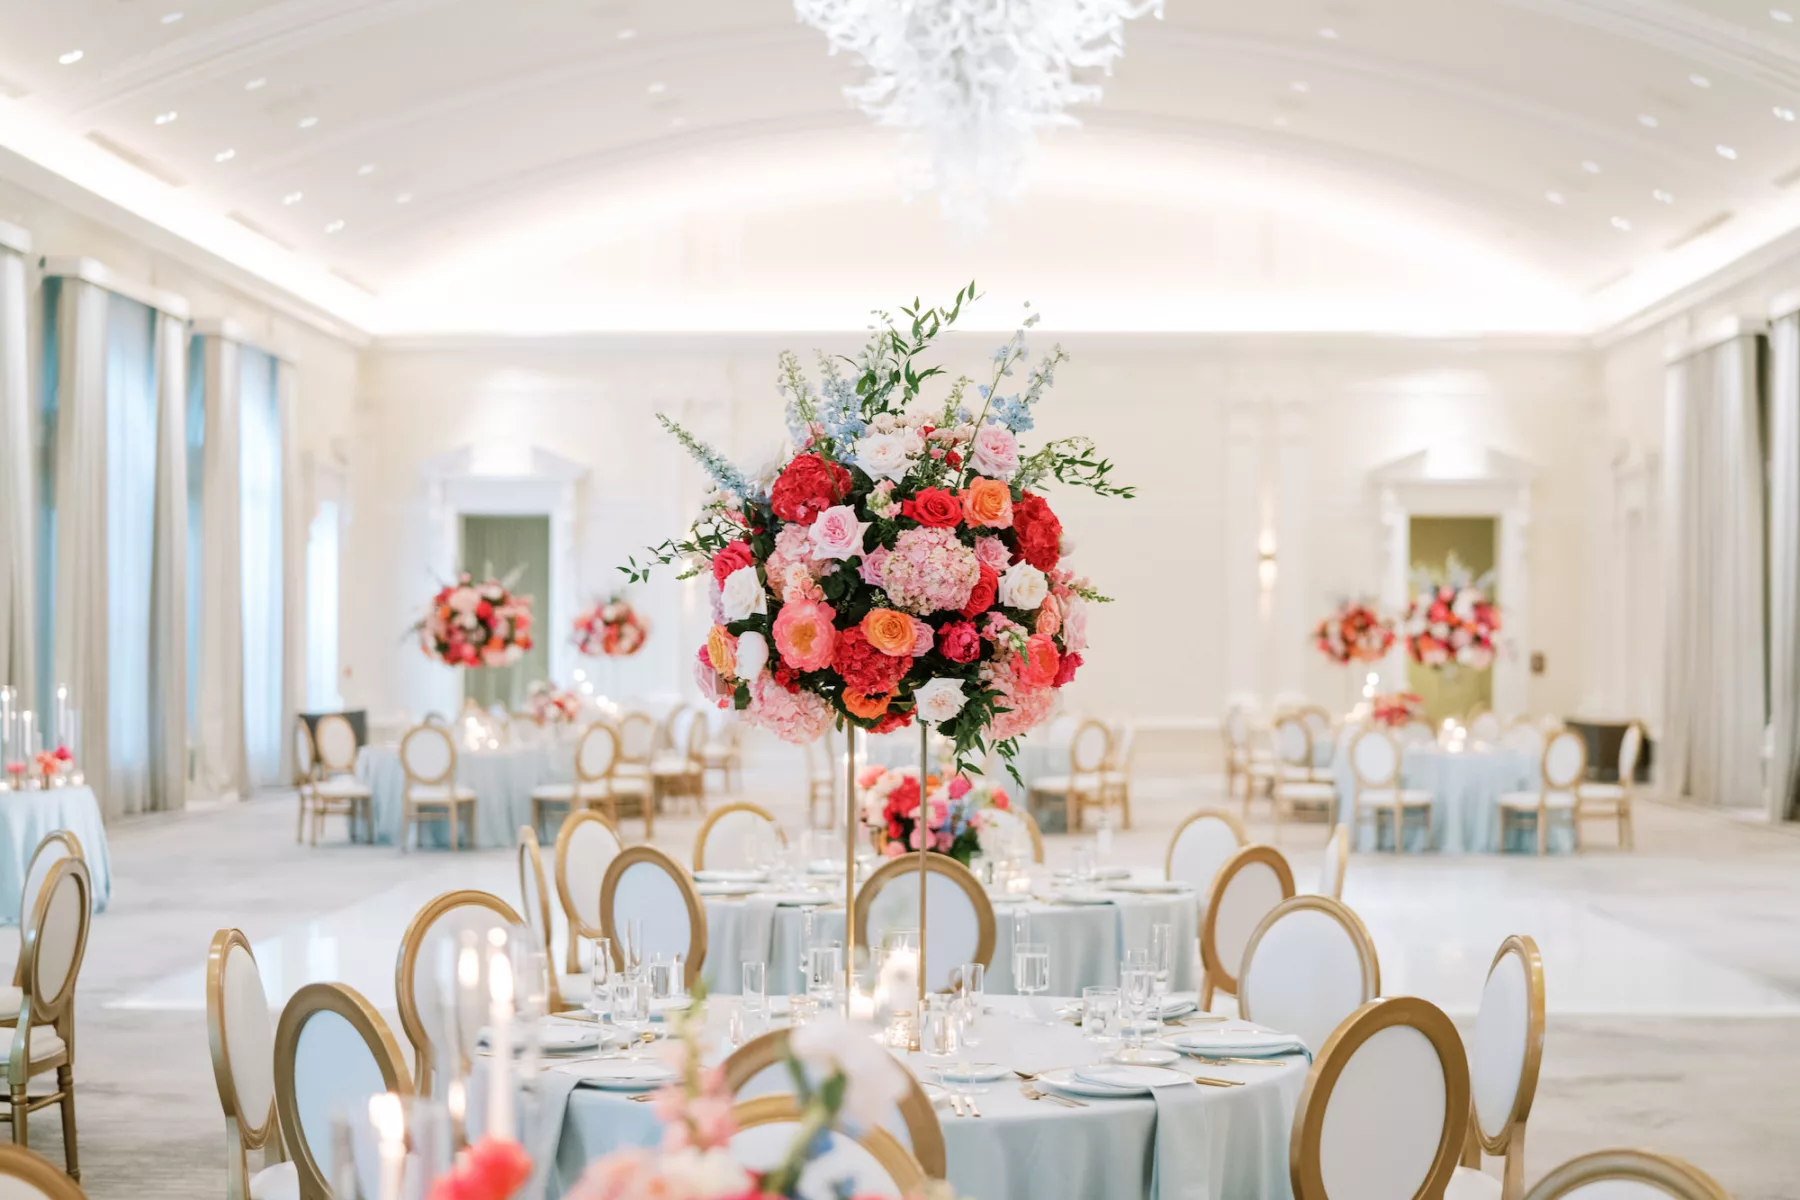 Luxurious Pink and Blue Wedding Reception Centerpiece Tablescape Decor Ideas | Tall Flower Stand with Pink Anemones and Hydrangeas, Orange Garden Roses, Blue Stock Flowers | St Pete Florist Bruce Wayne Florals | Kate Ryan Event Rentals | Venue The Vinoy